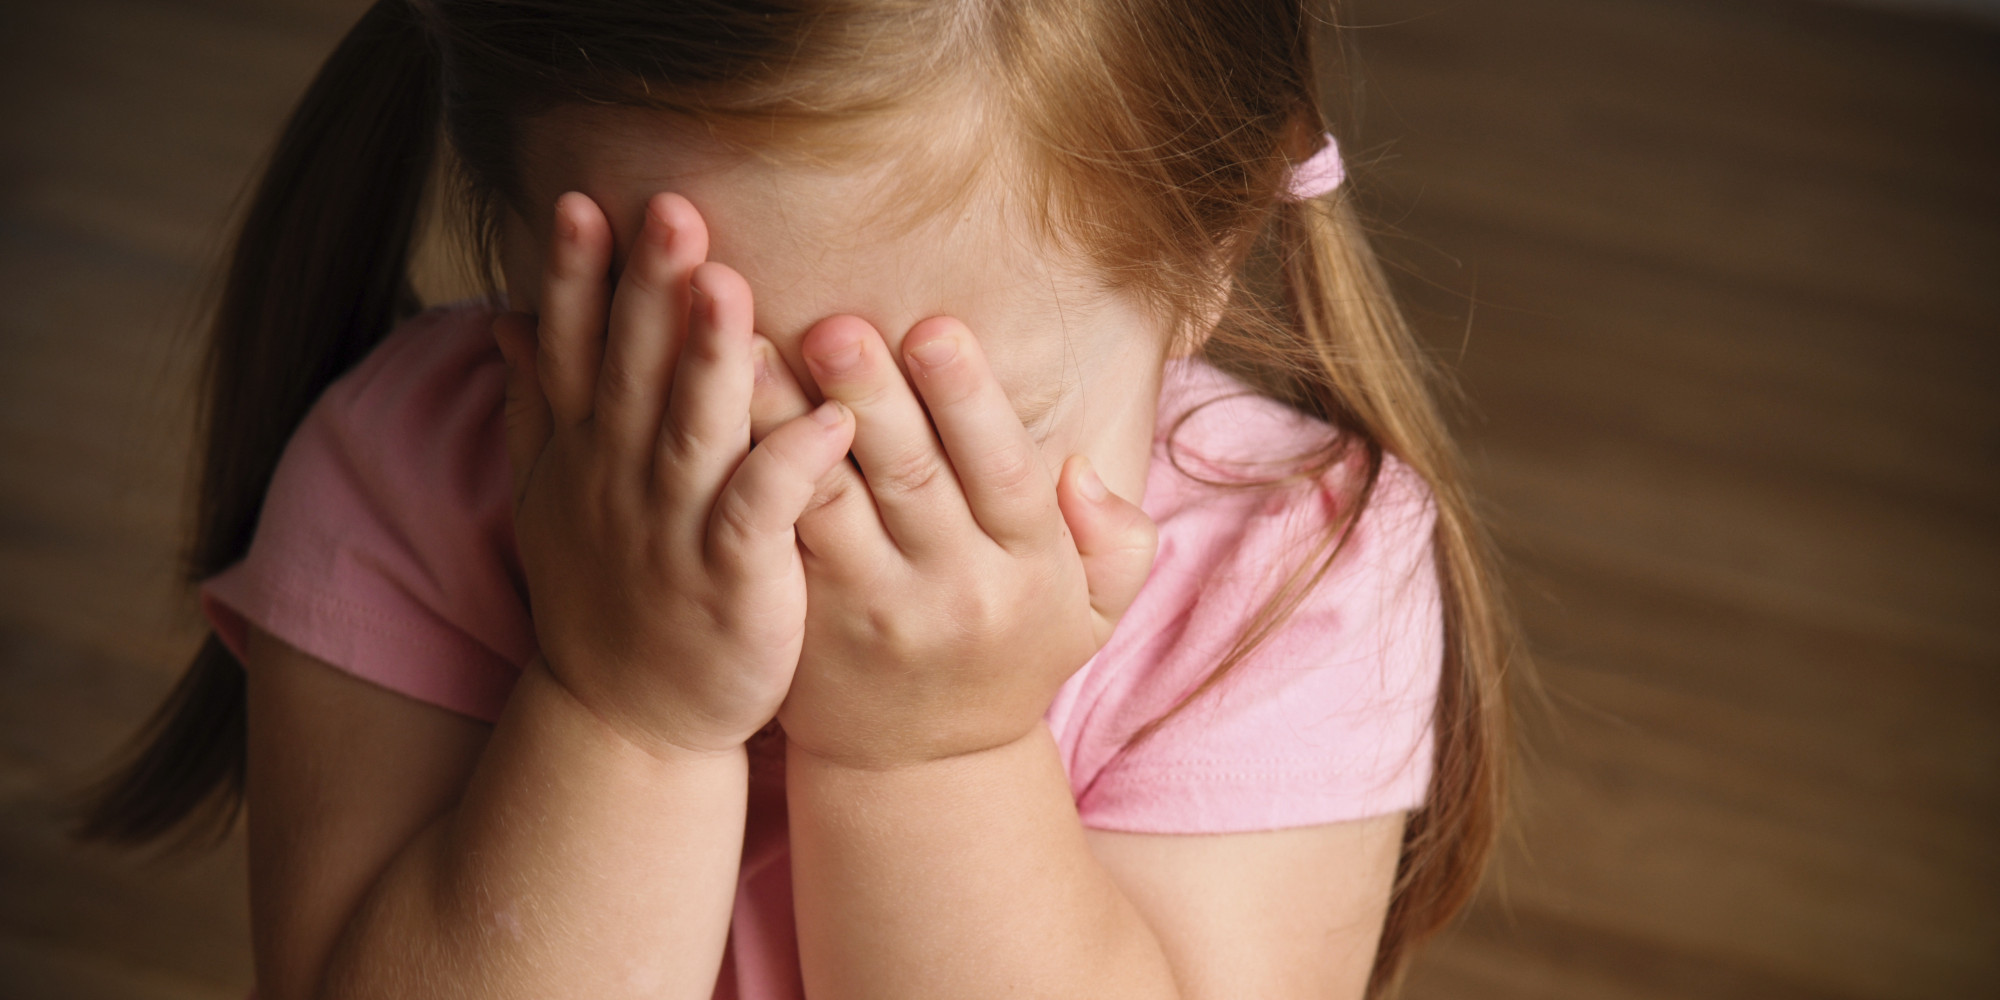 How To Help Your Child Deal With Shyness Dr Shimi Kang